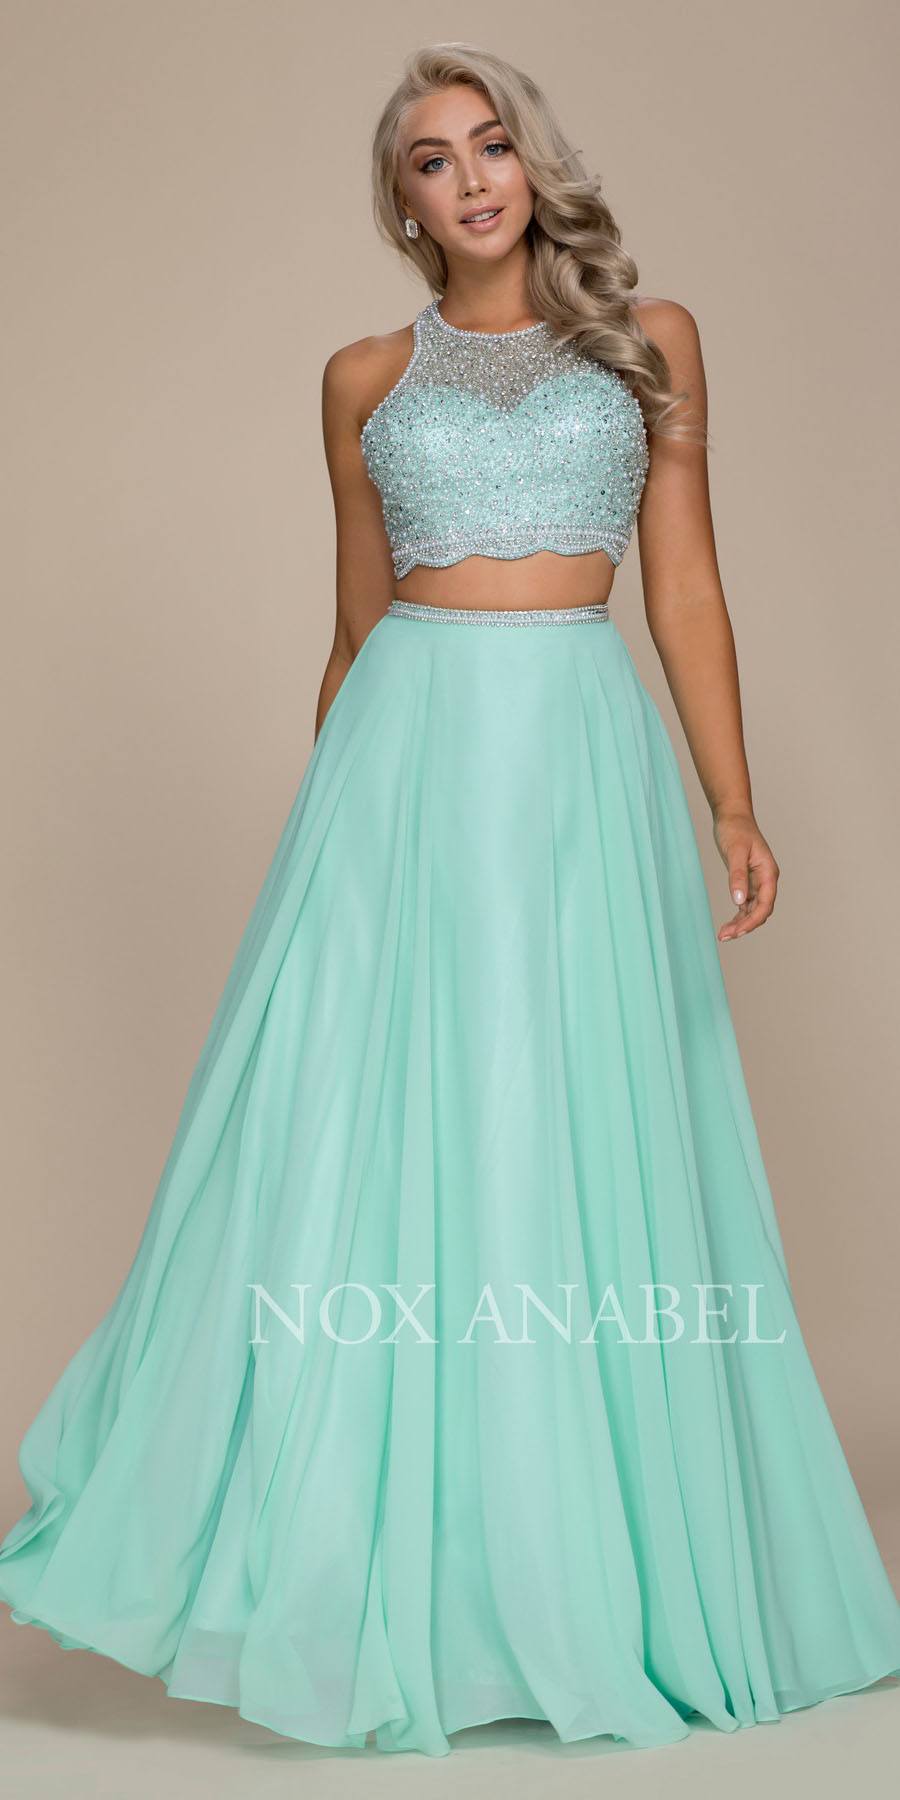 crop top gowns for prom